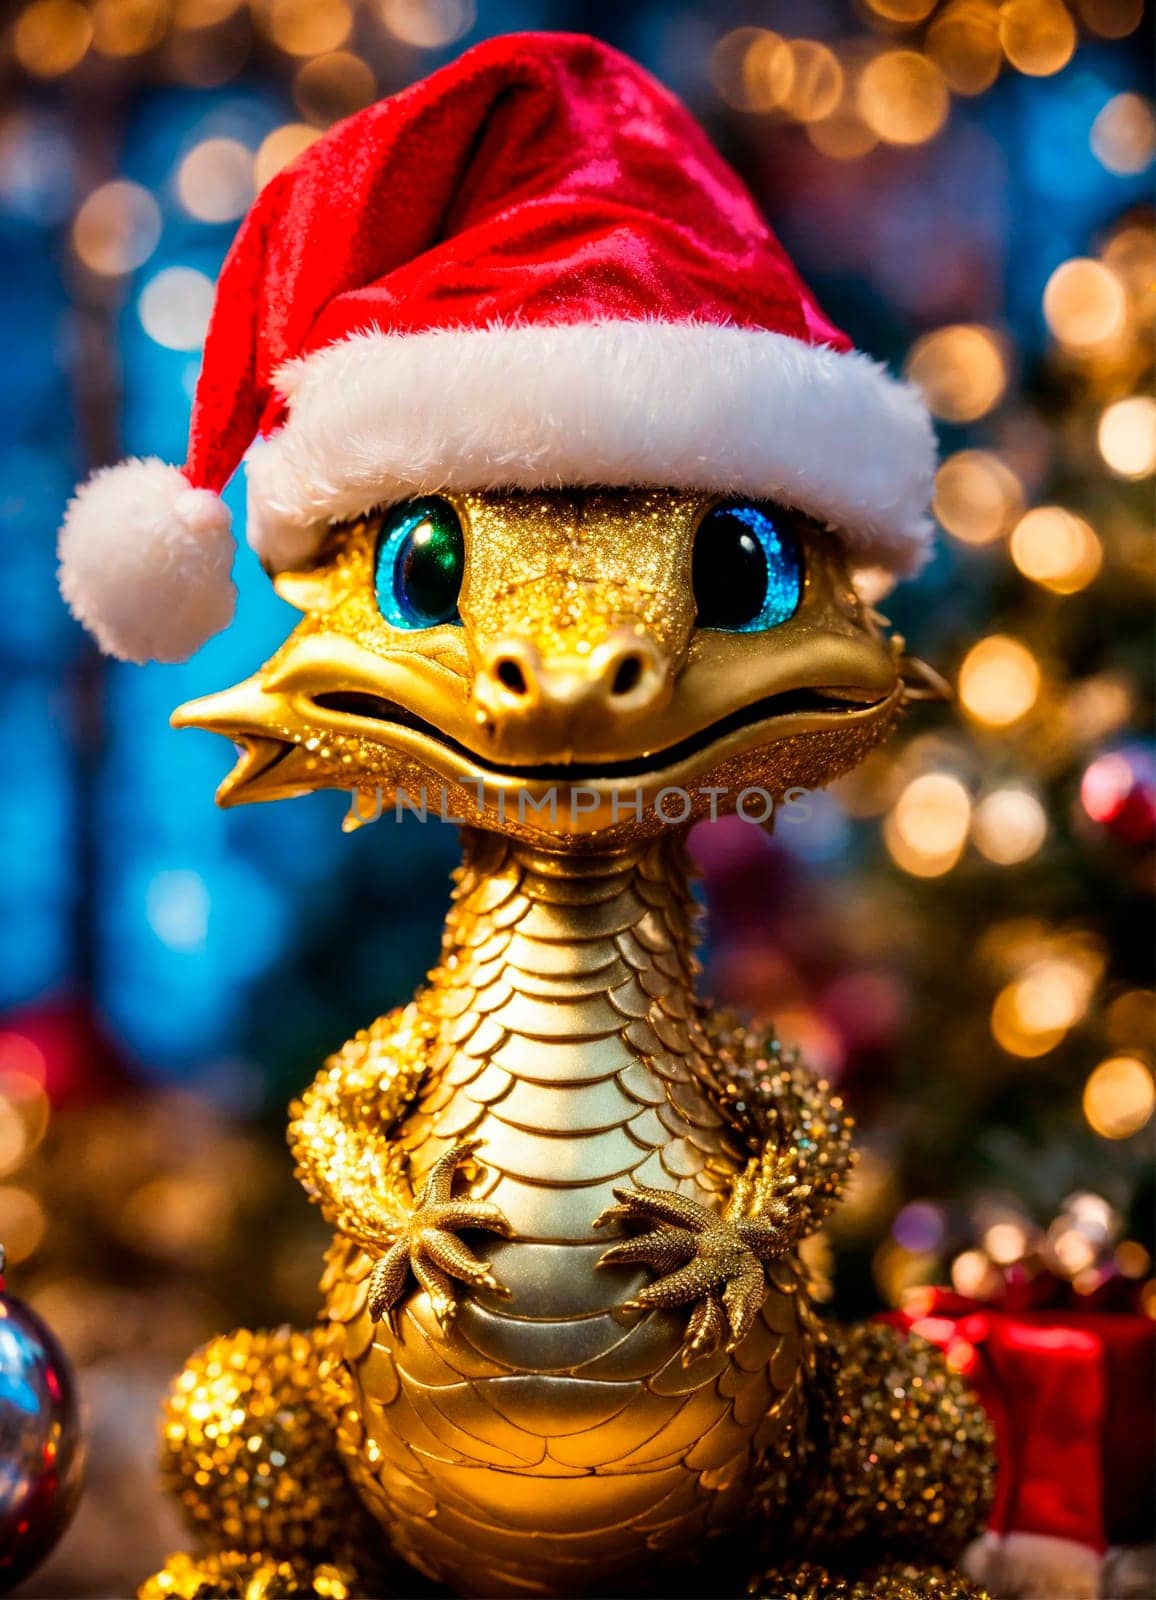 dragon in santa's hat year of the dragon. Selective focus. holiday.